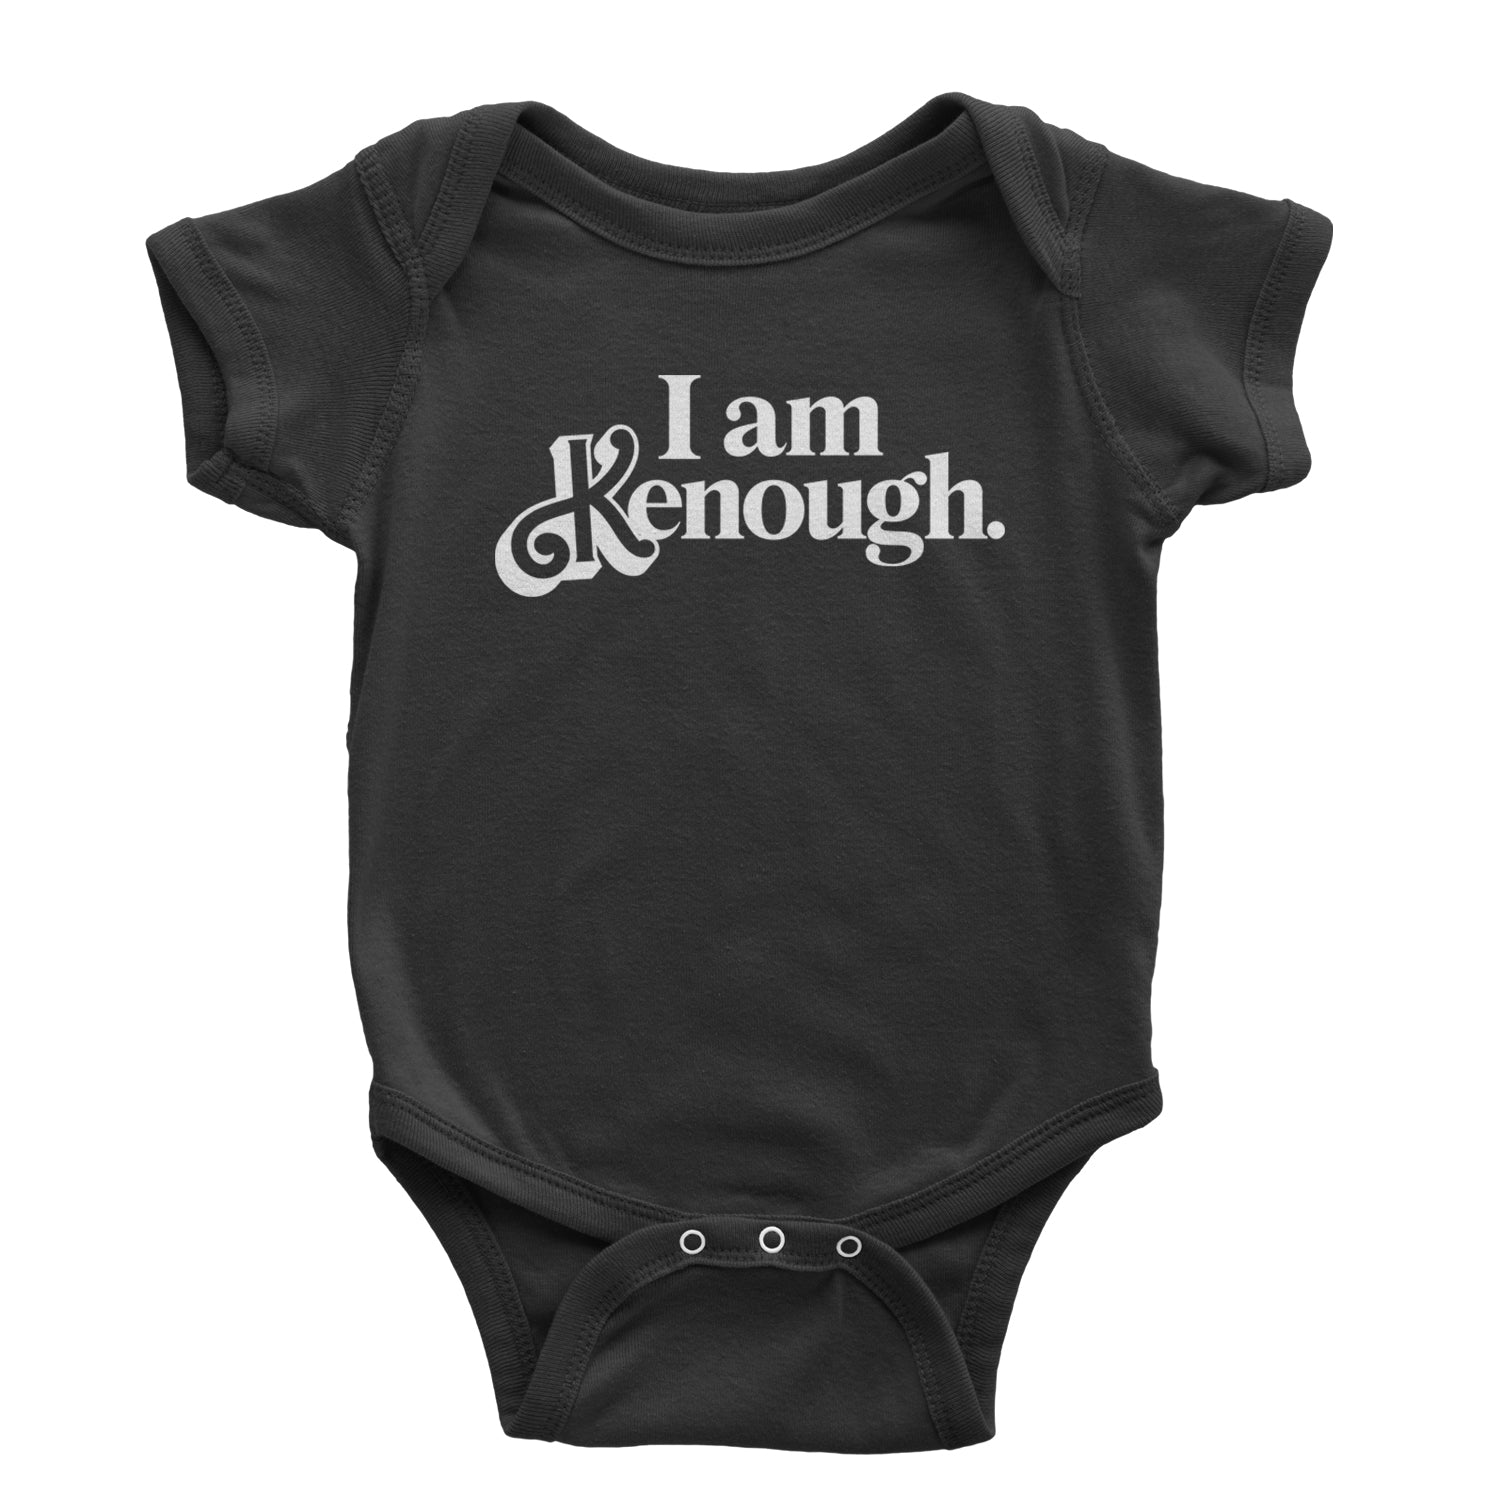 I Am Kenough White Print Infant One-Piece Romper Bodysuit and Toddler T-shirt